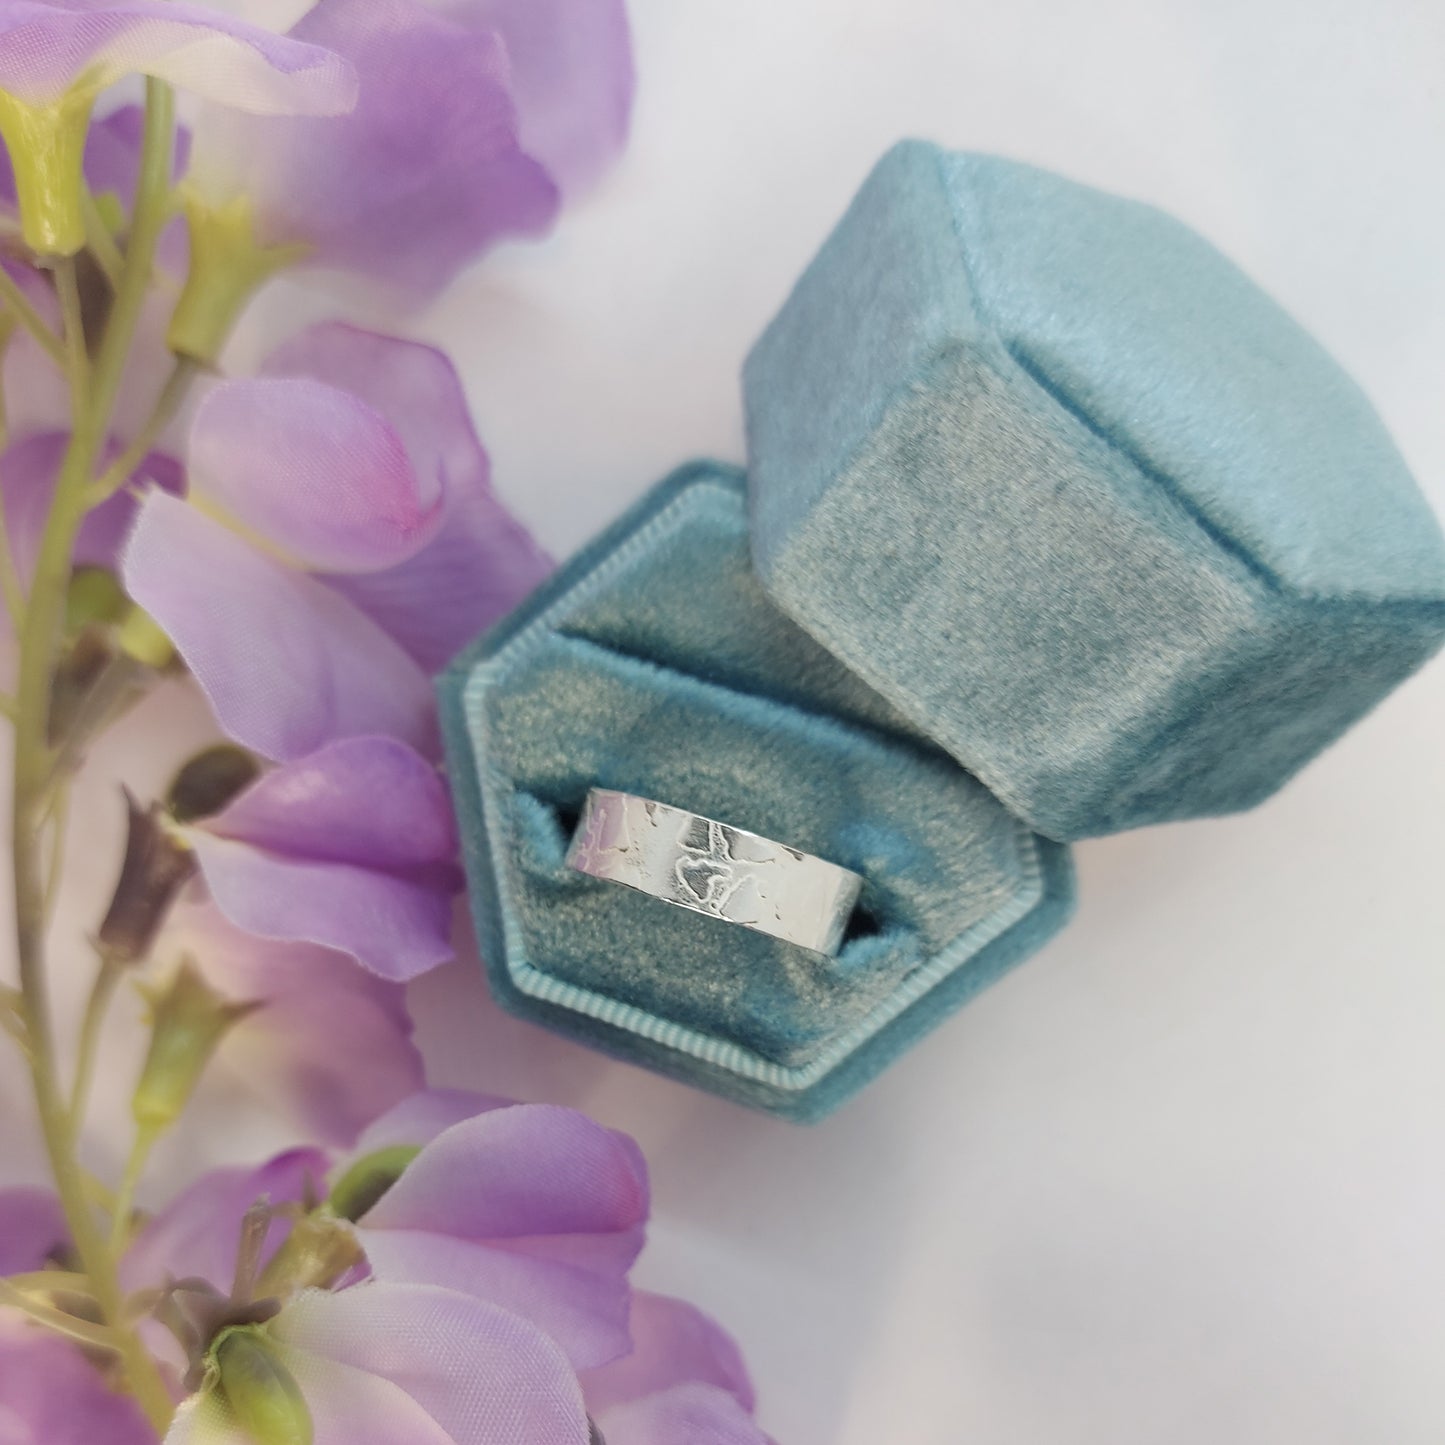 Silver band ring with islands in the sea style pattern. Pictured in a box with flowers.